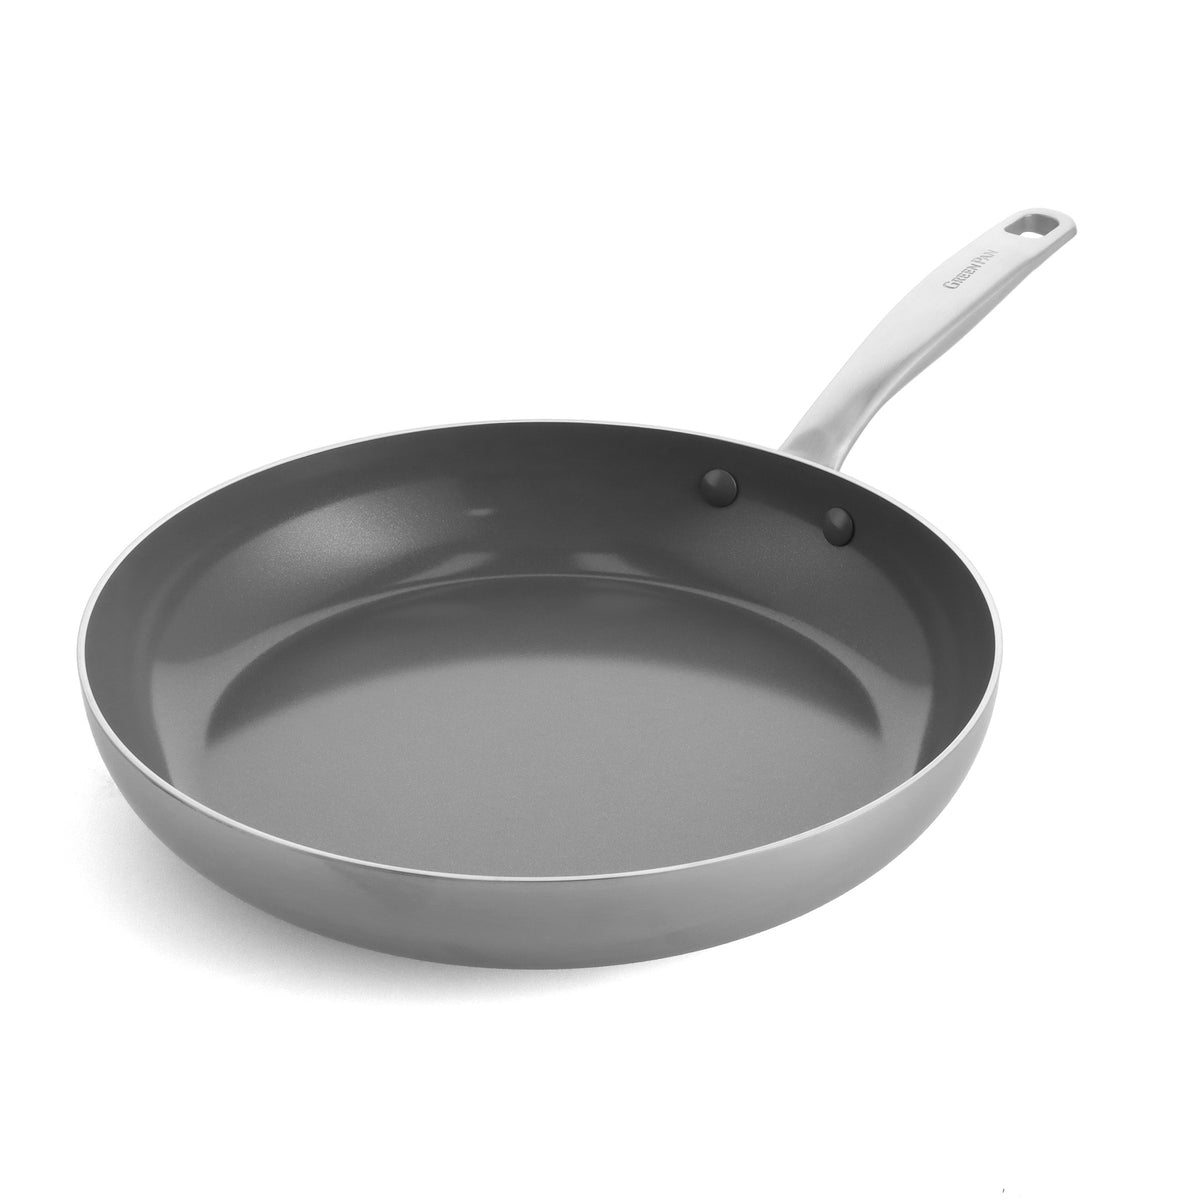 10-Inch and 12-Inch Fry Pan Set / Stainless - Packaging Damage